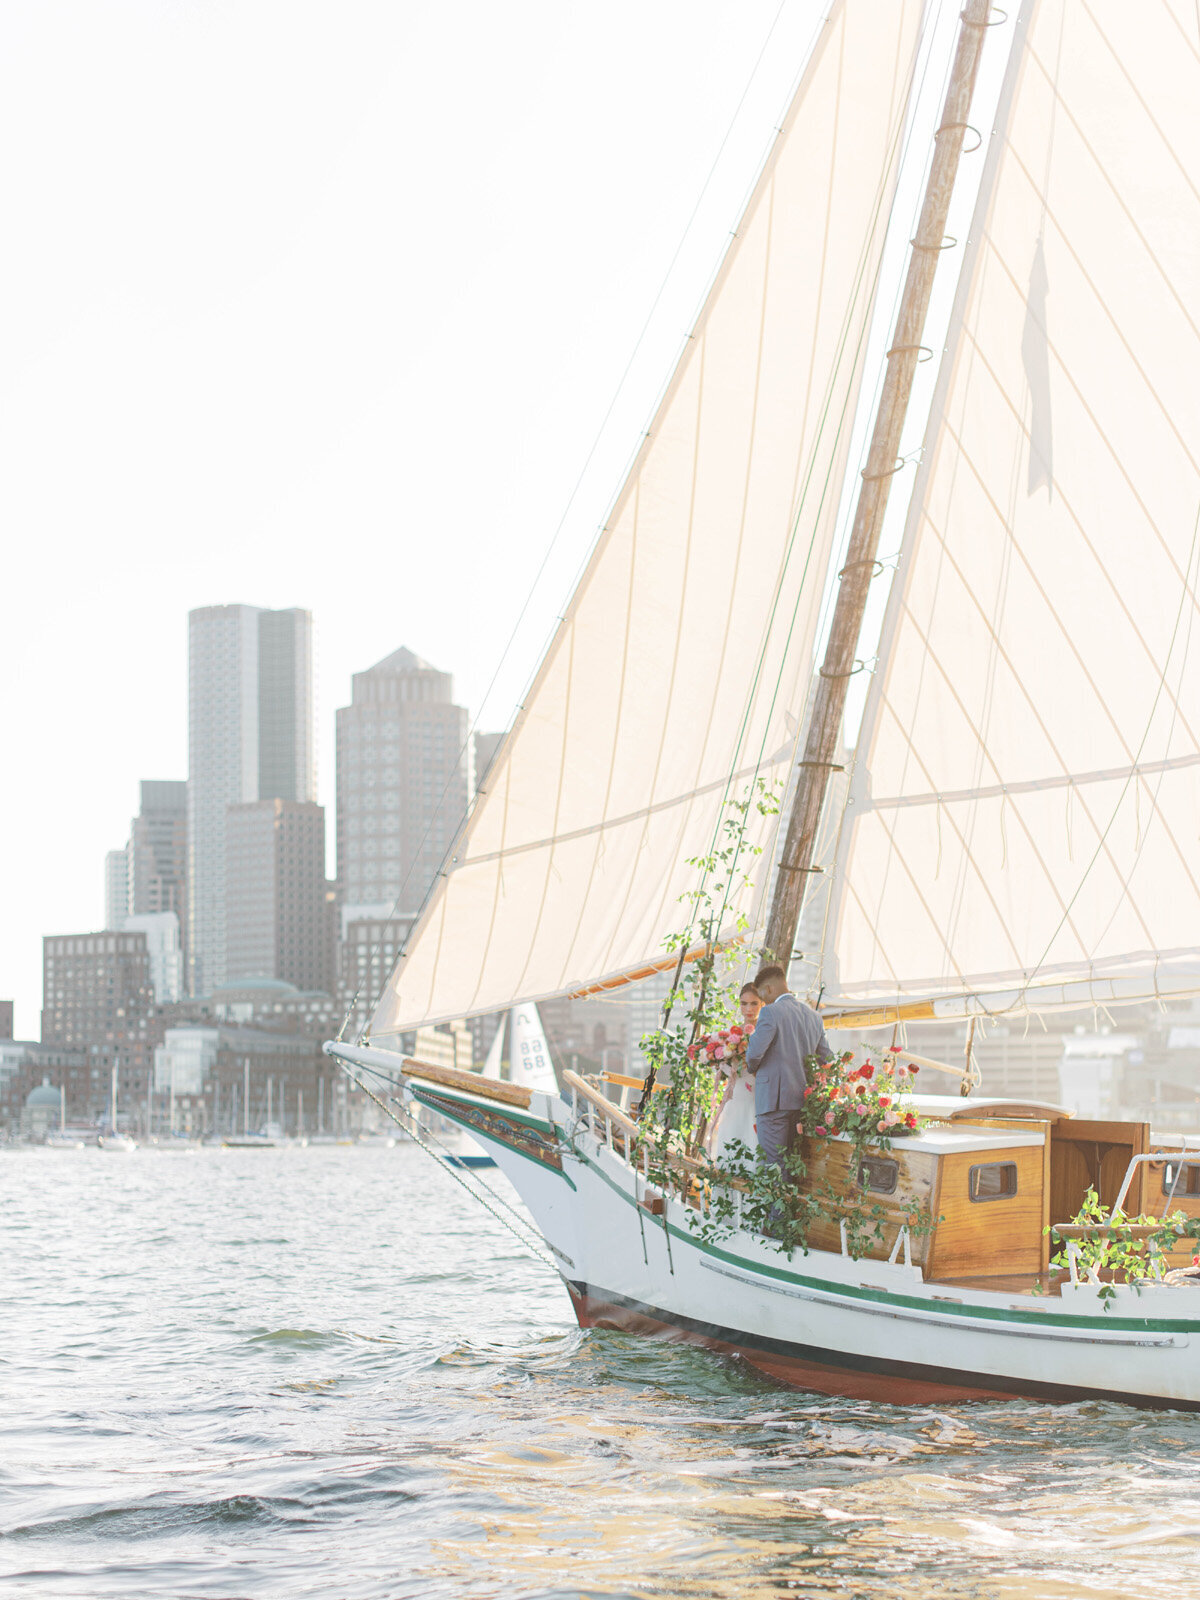 Kate-Murtaugh-Events-elopement-wedding-planner-Boston-Harbor-sailing-sail-boat-yacht-greenery-floral-installation-couple-bride-groom-water-skyline-view